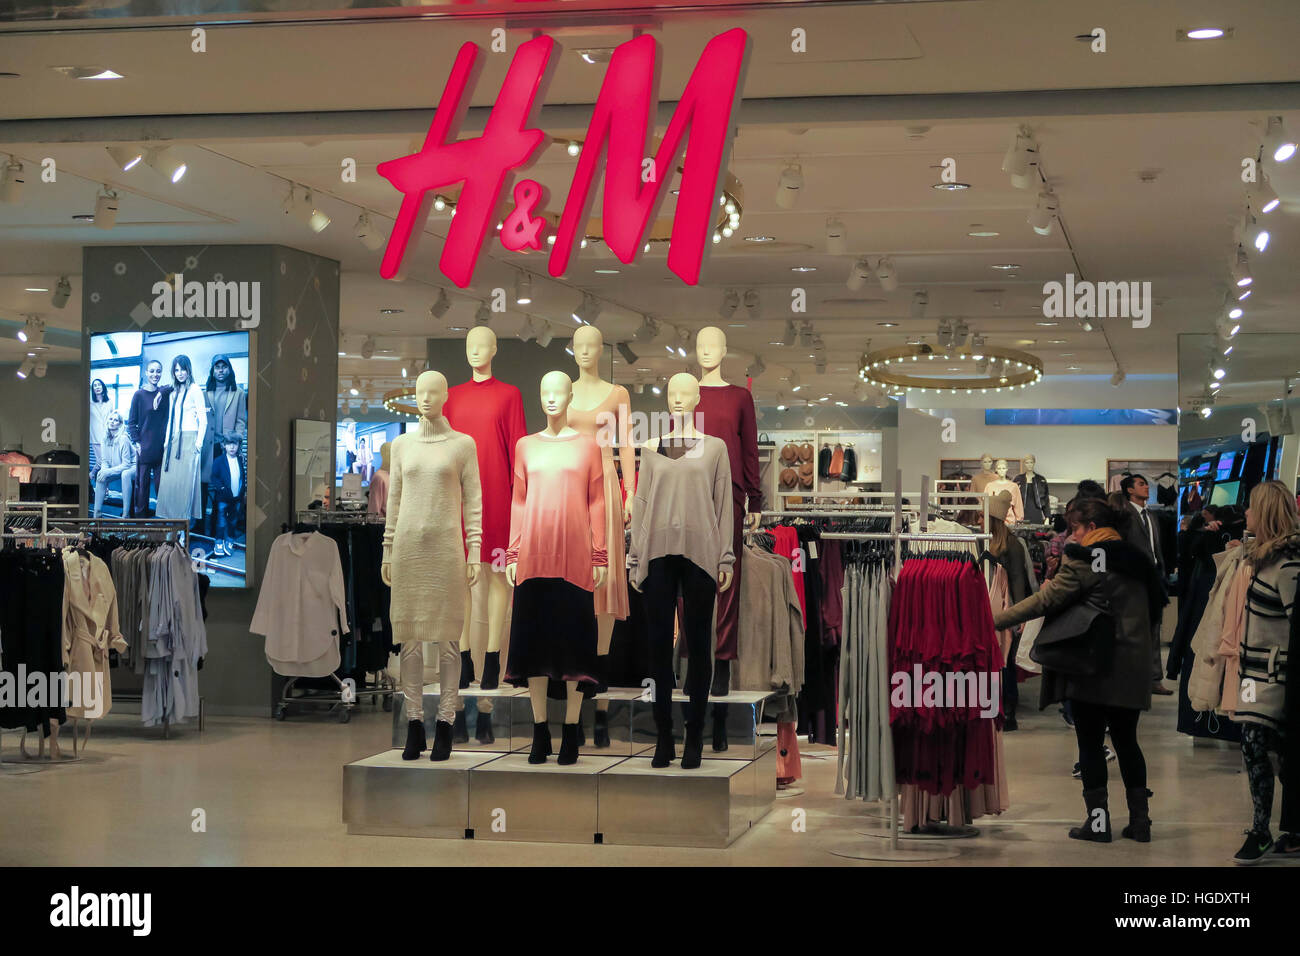 H&M to close 240 stores as it cuts 2,950 jobs